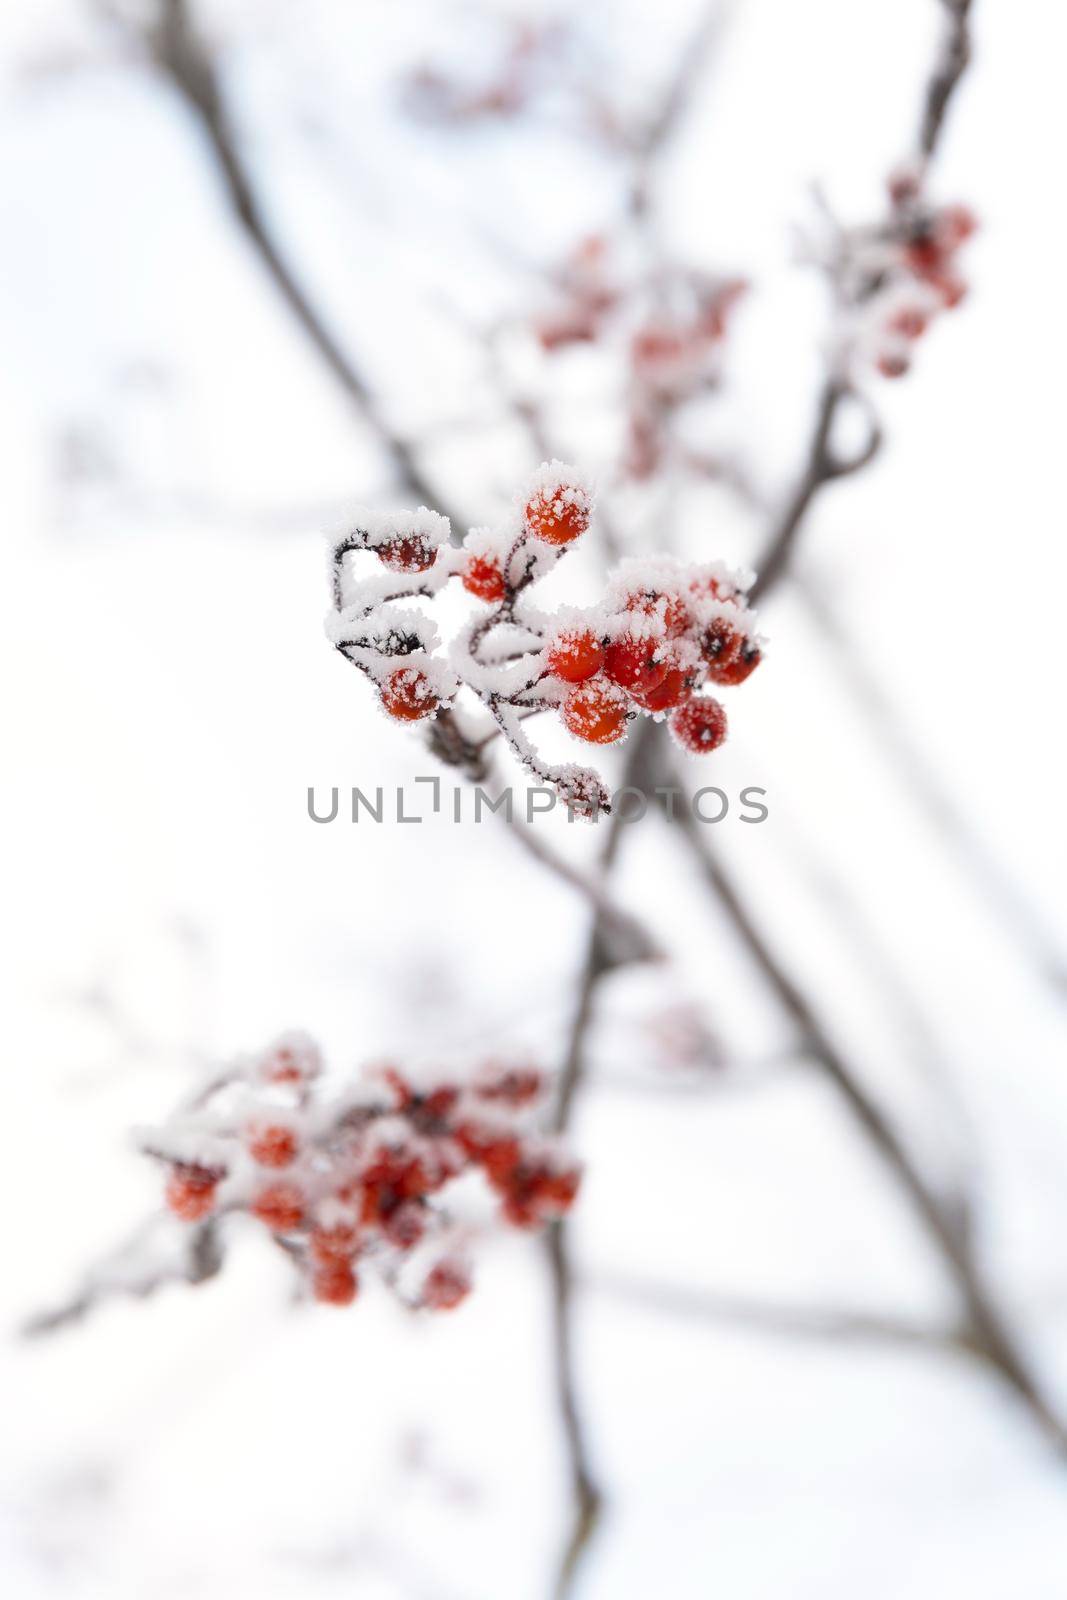 rowan branches close-up with orange and red fruits covered with hoarfrost and snow photo with depth of field by TRMK